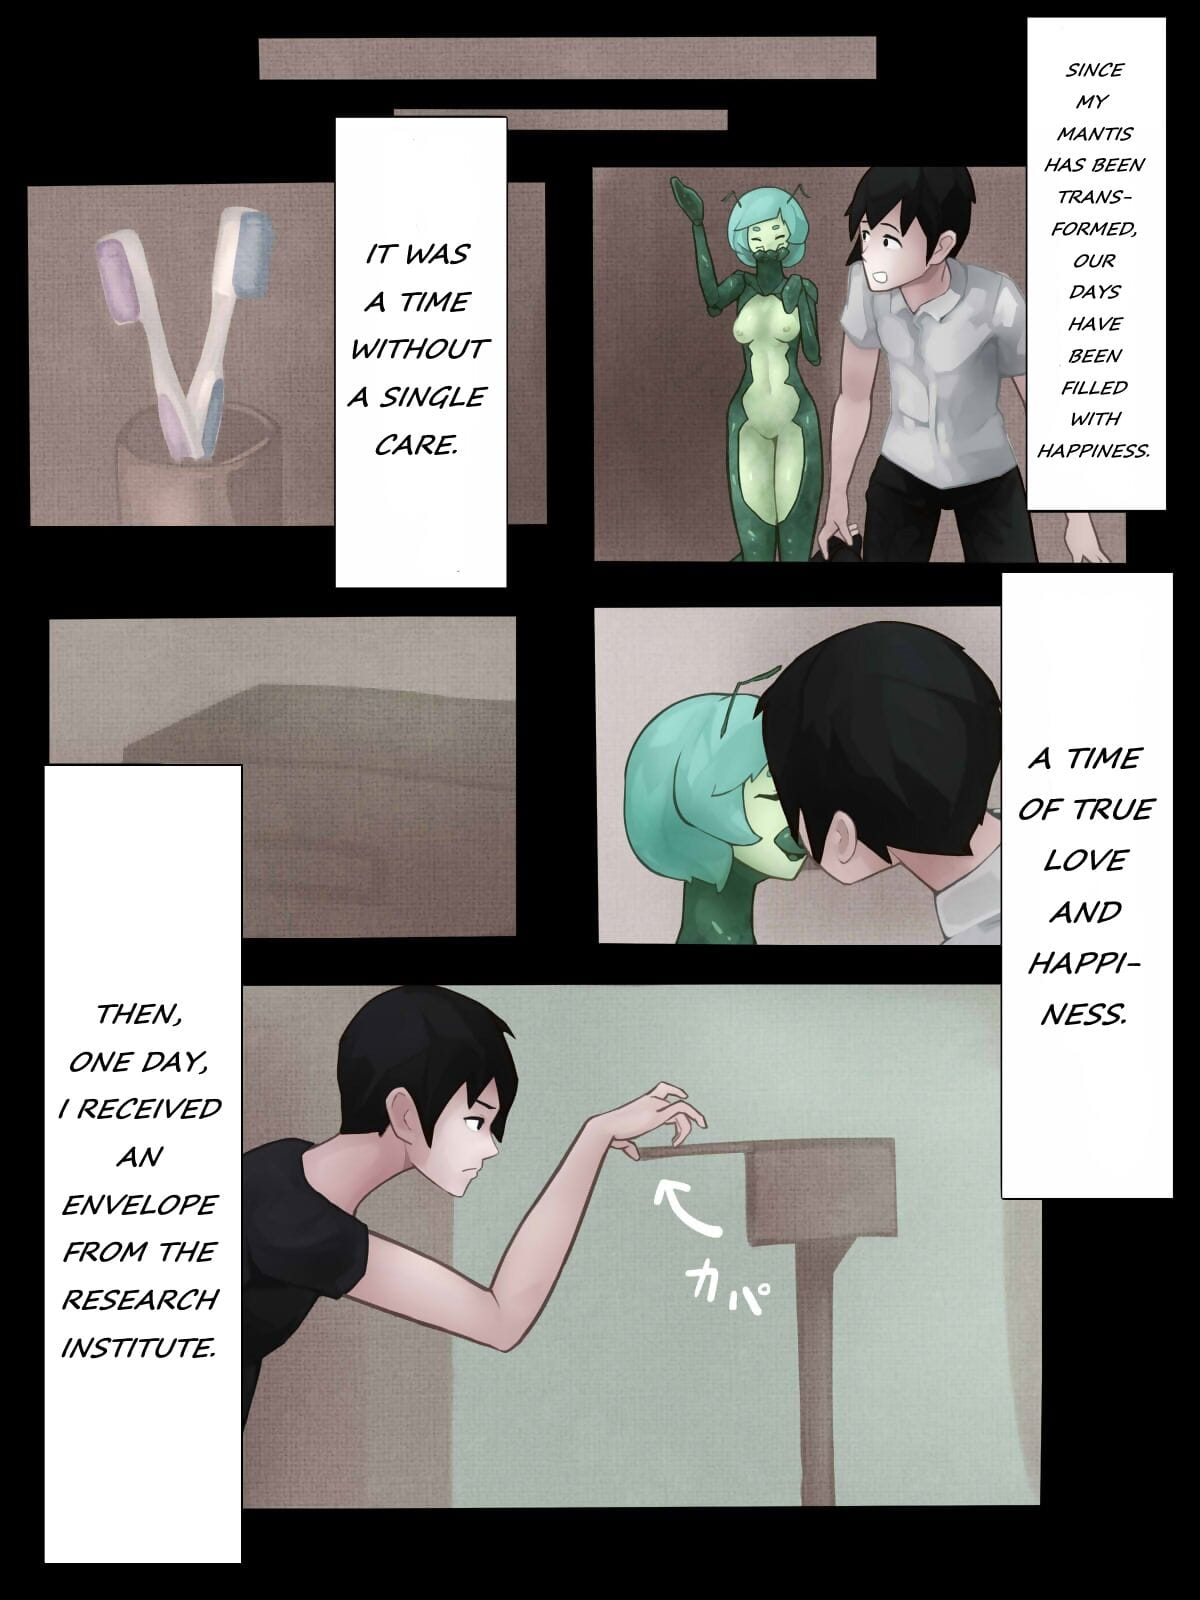 Sex with Mantis Girl -Report of Humanizer Virus Infection- page 1